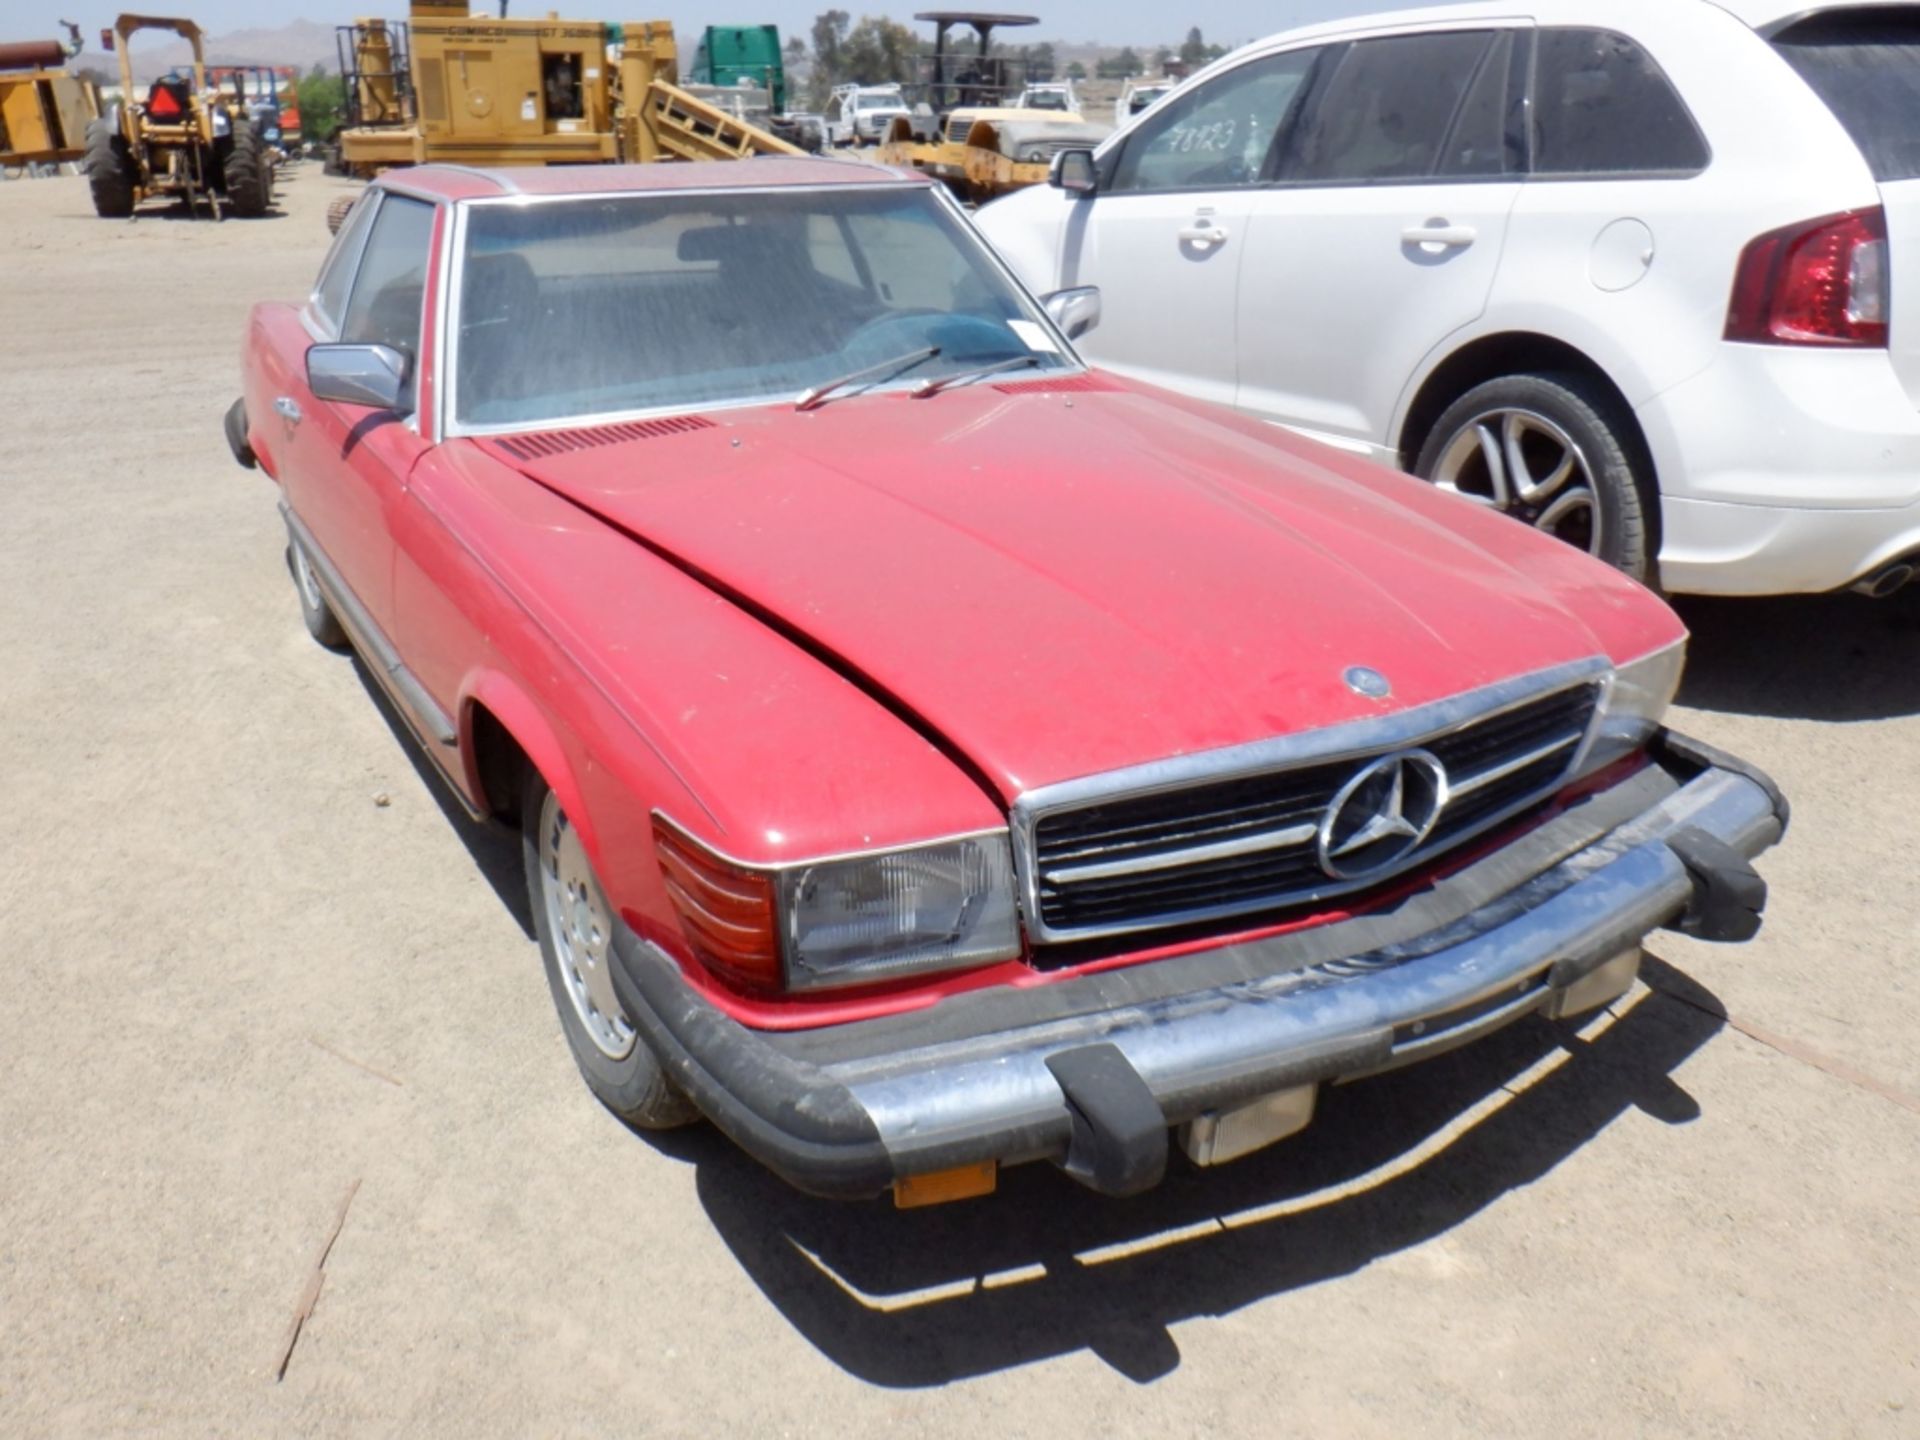 Mercedes Benz 500SL Coupe, - Image 2 of 16